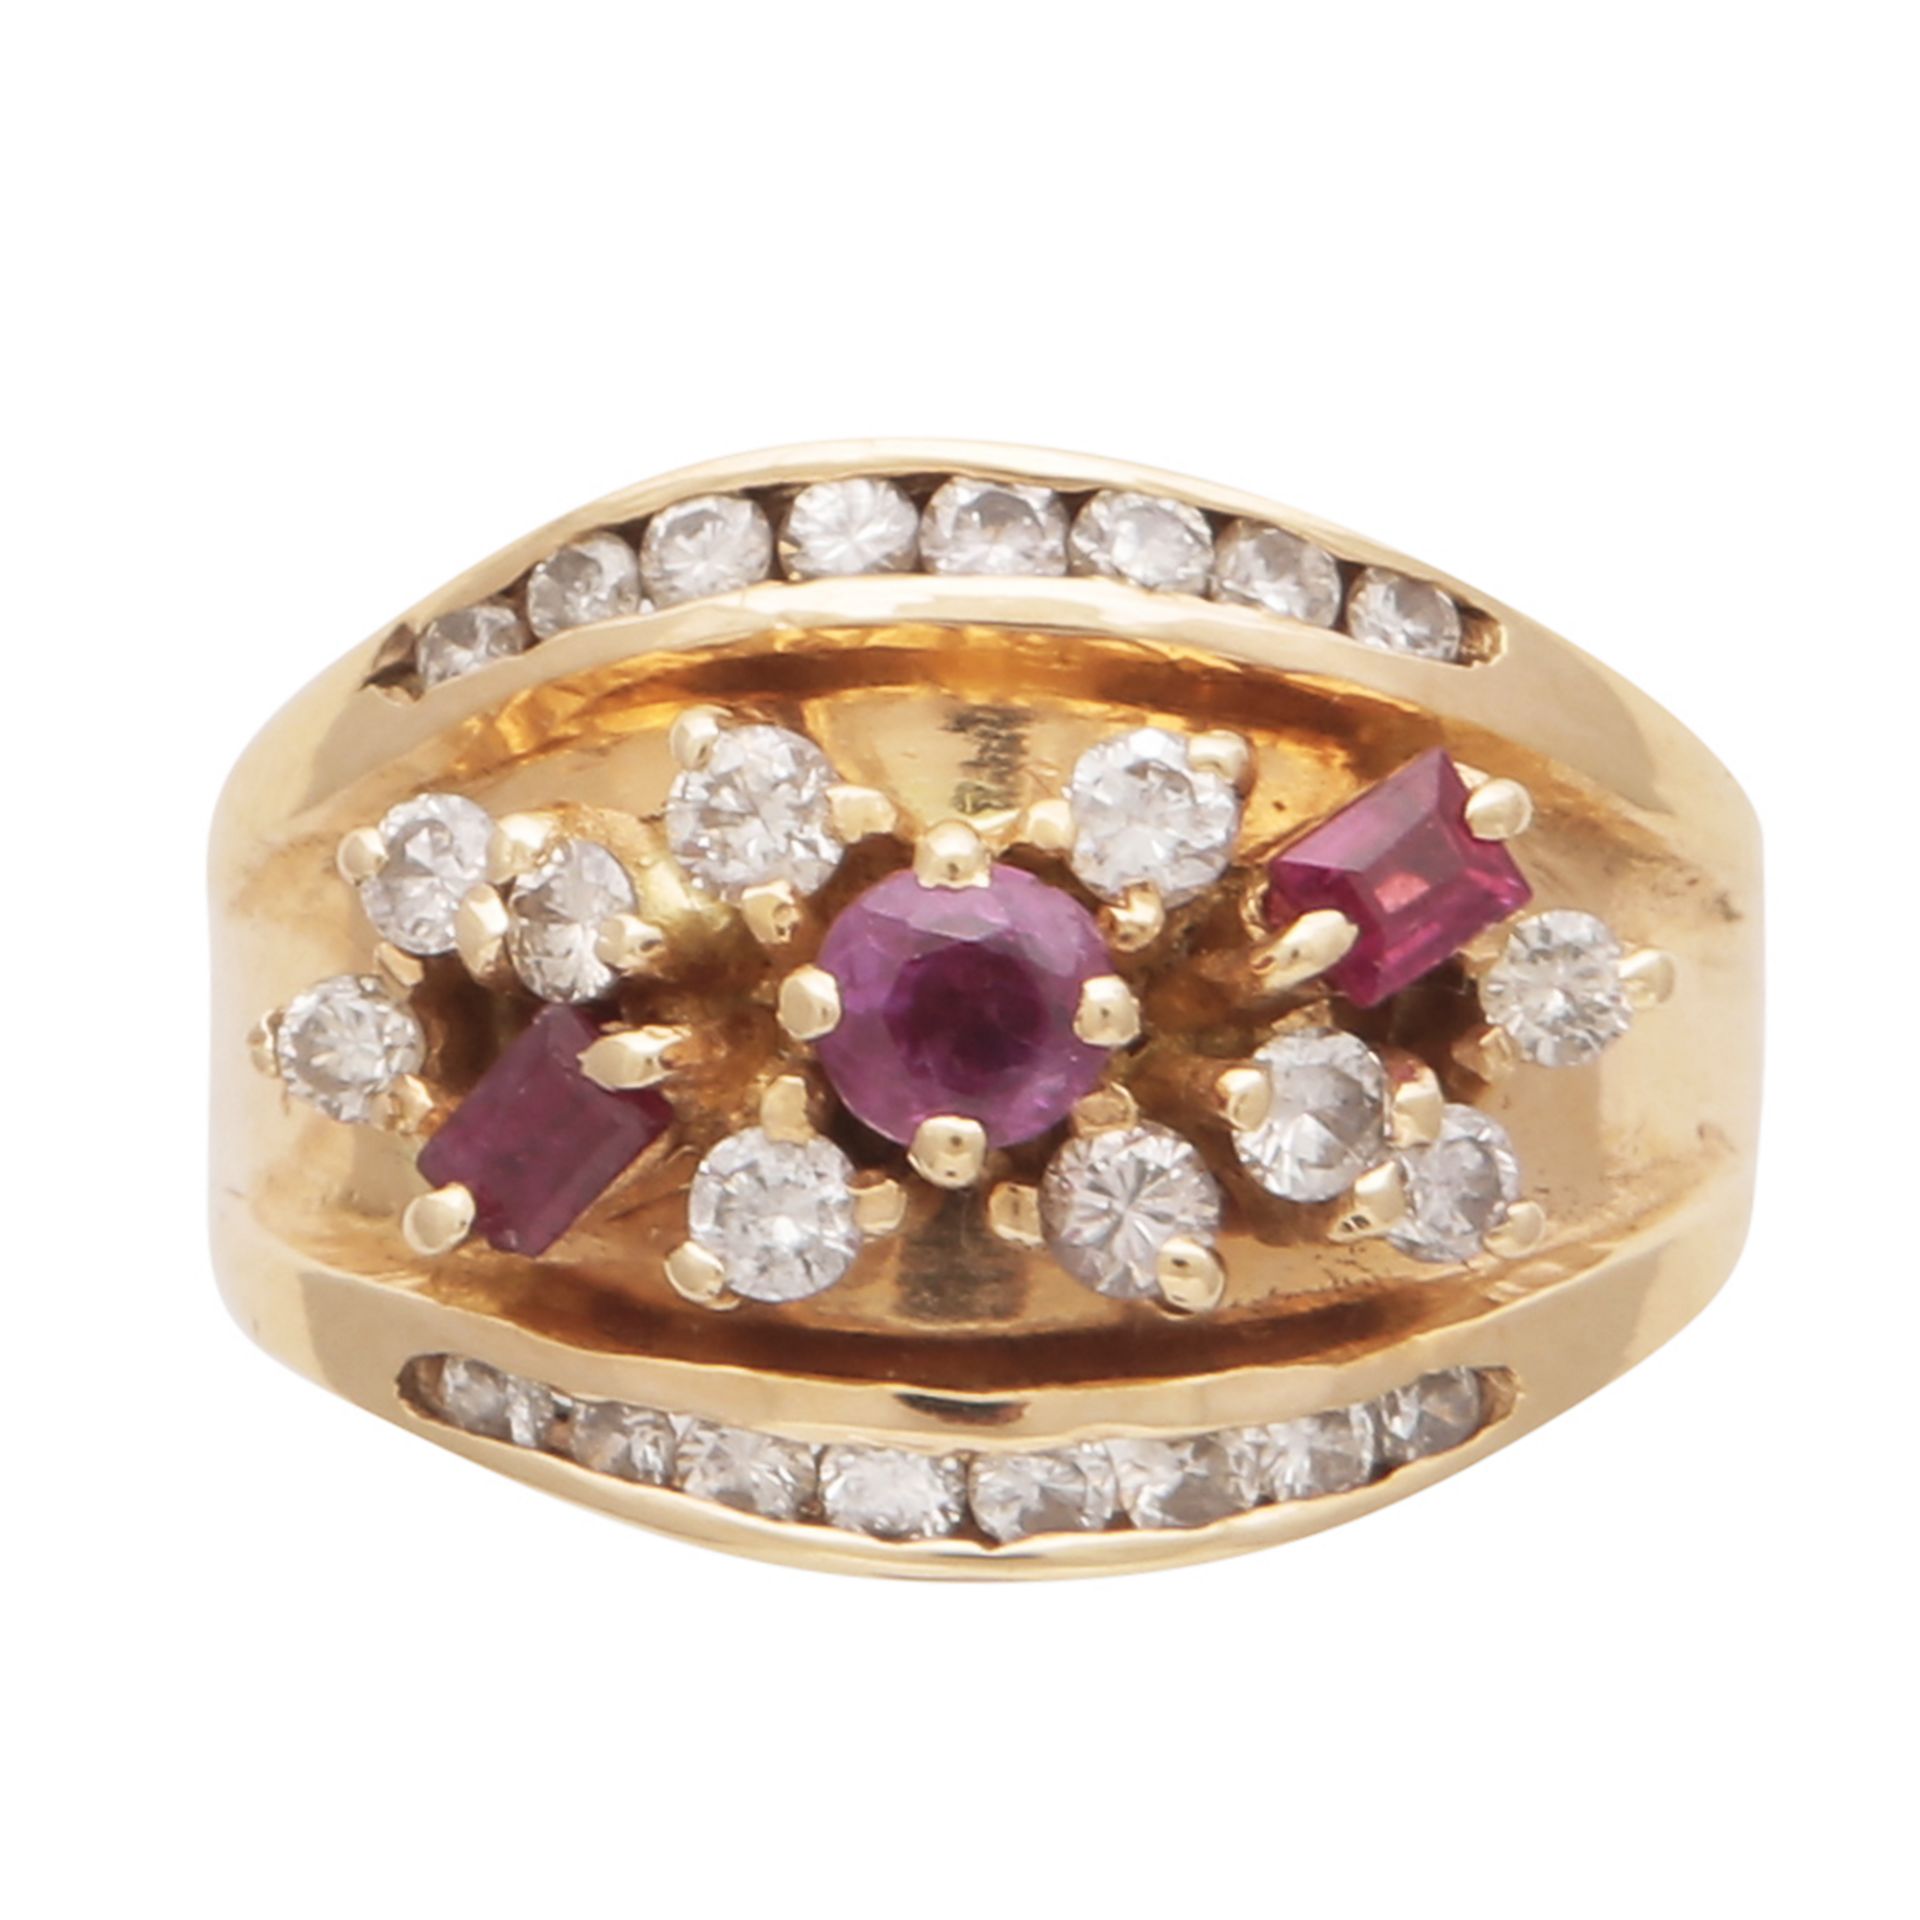 An antique ruby and diamond dress ring in 18ct yellow gold set with a one round and two